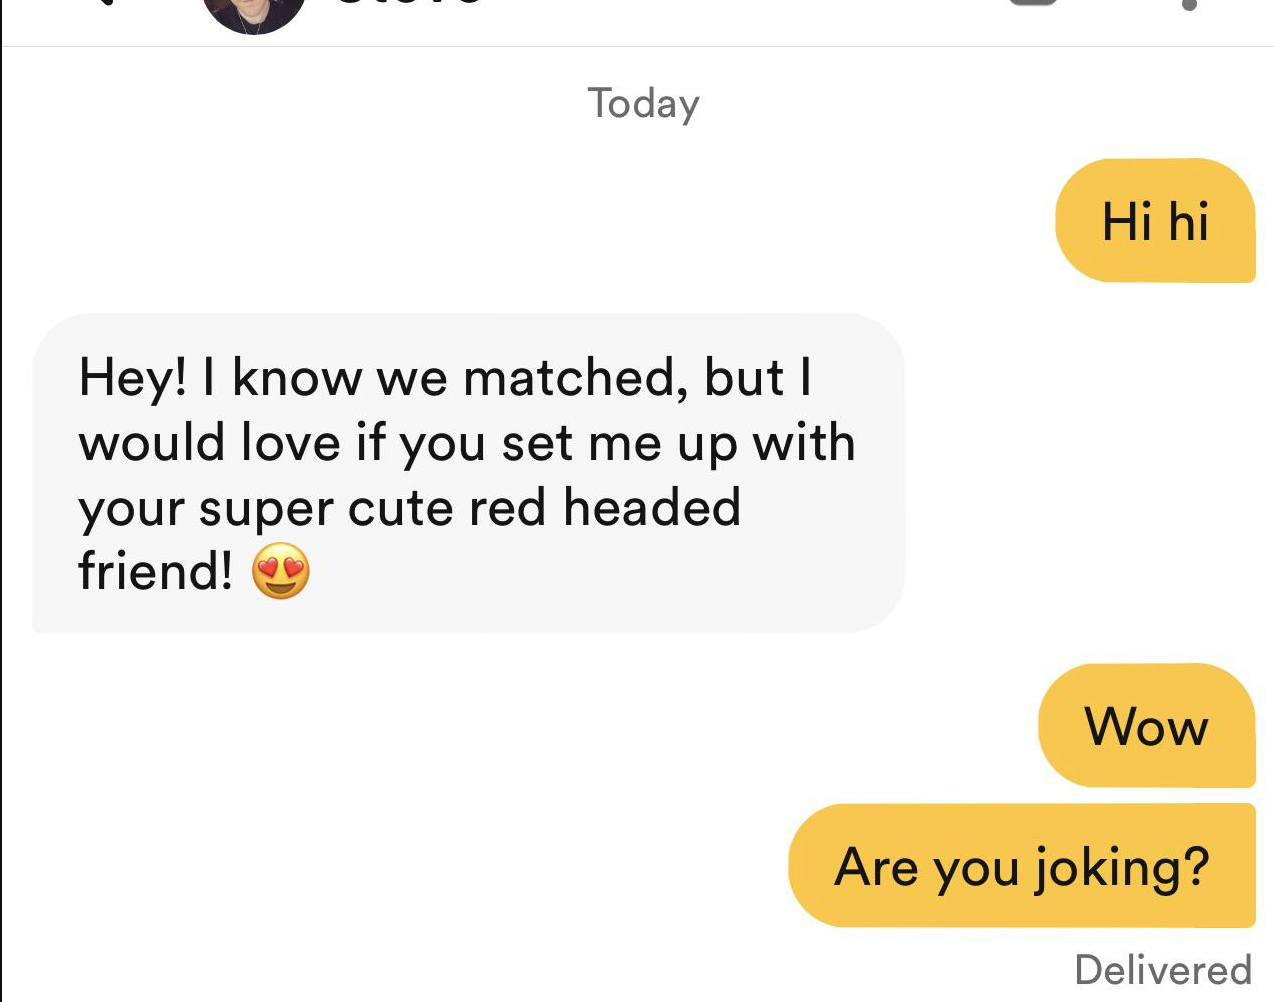 Someone&#x27;s match says &quot;I would love if you set me up with your super cute red-headed friend&quot;